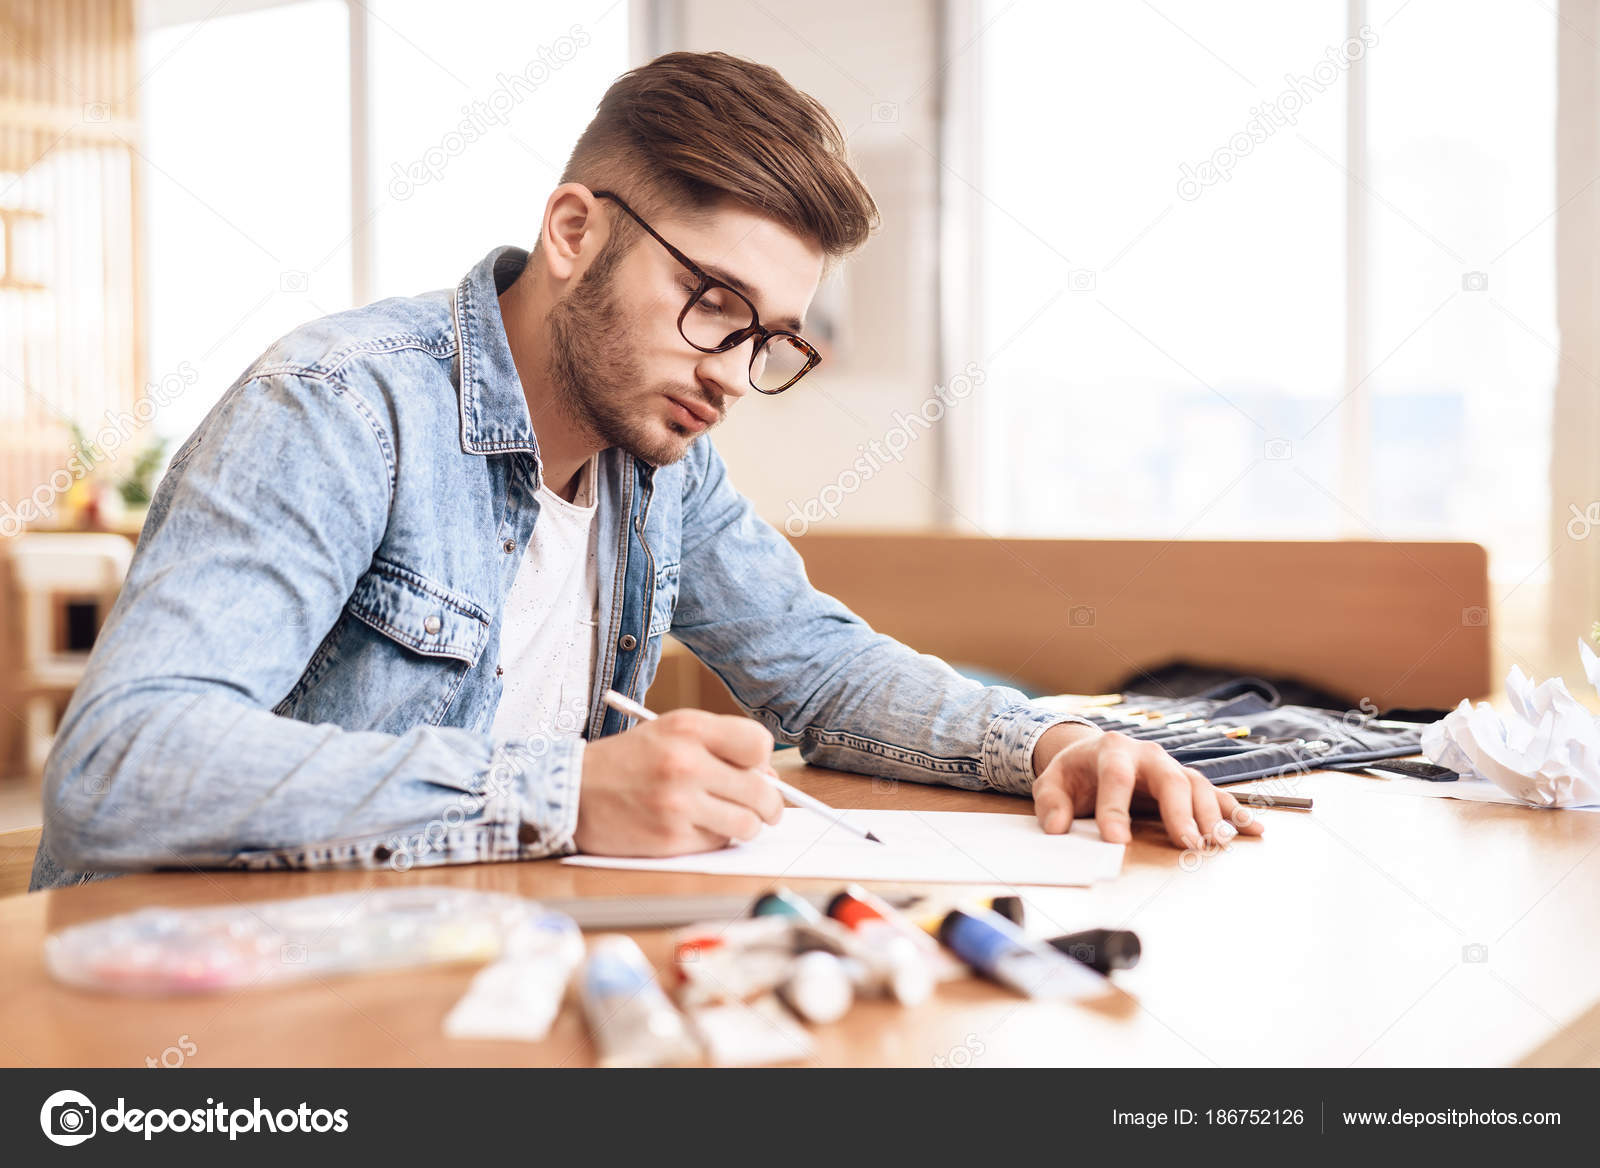 How To Draw Someone Sitting At A Desk Freelancer Man Drawing On